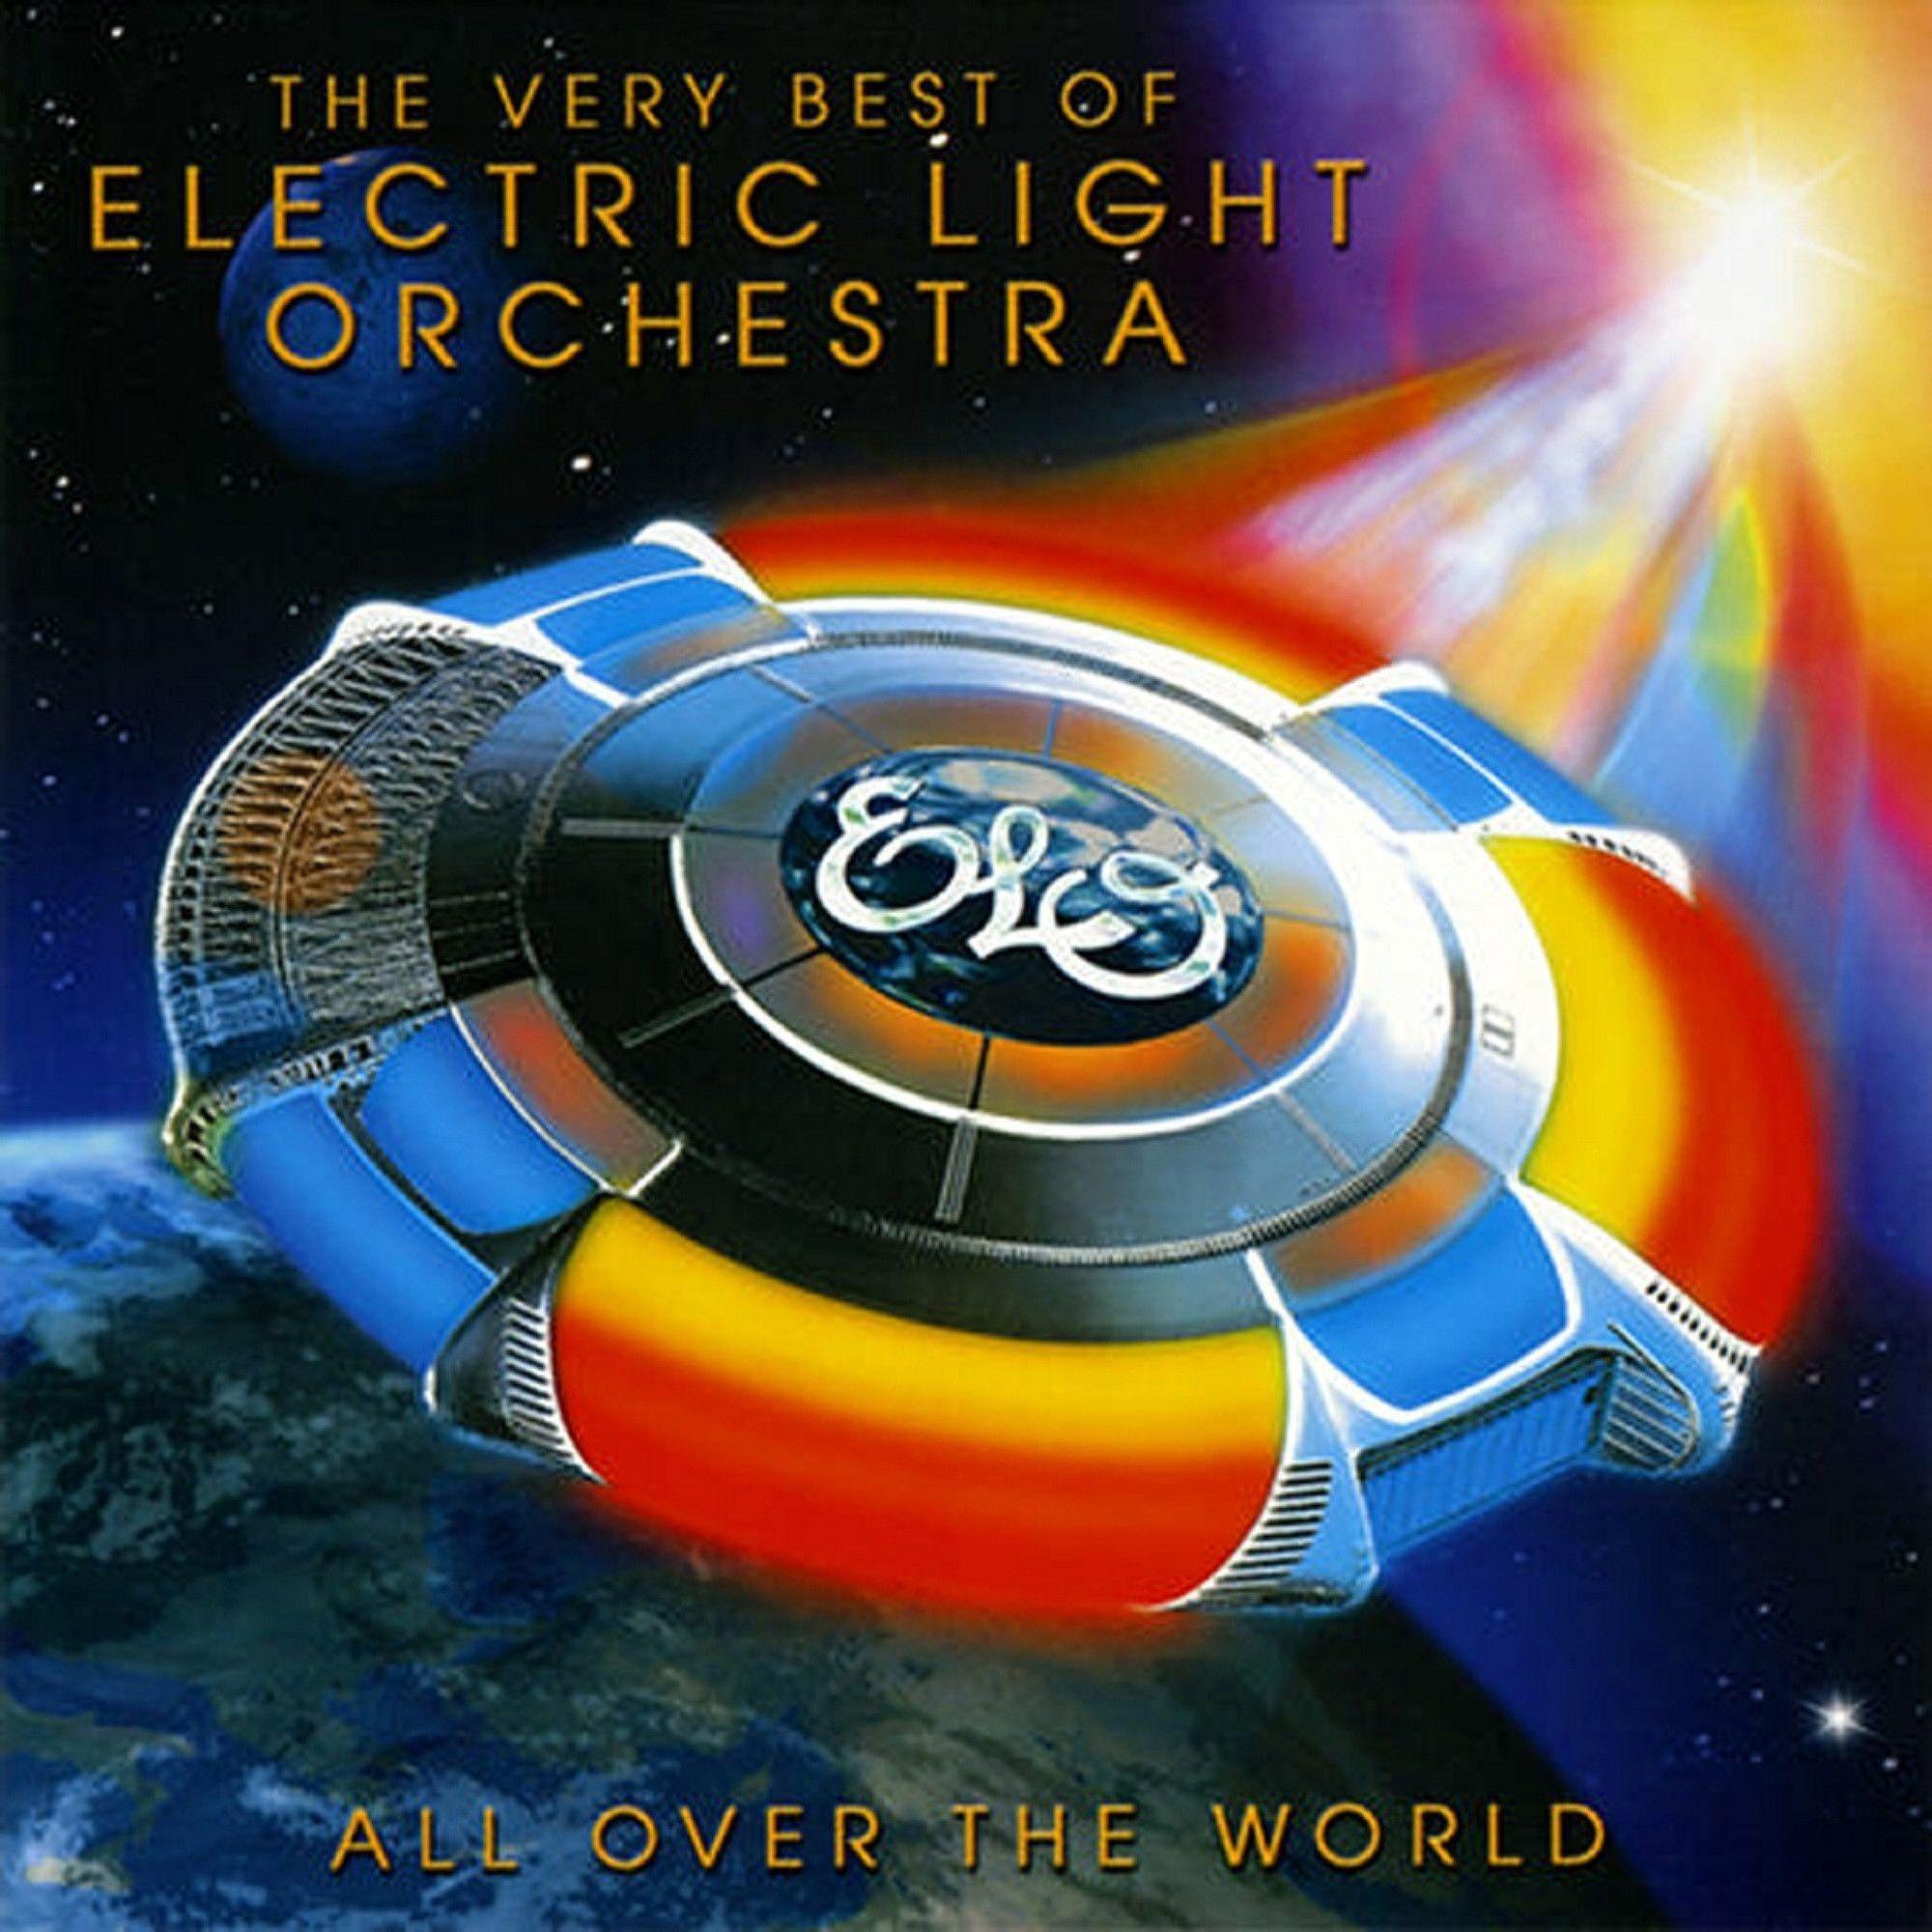 Electric Light Orchestra Wallpaper PIC WPXH339898